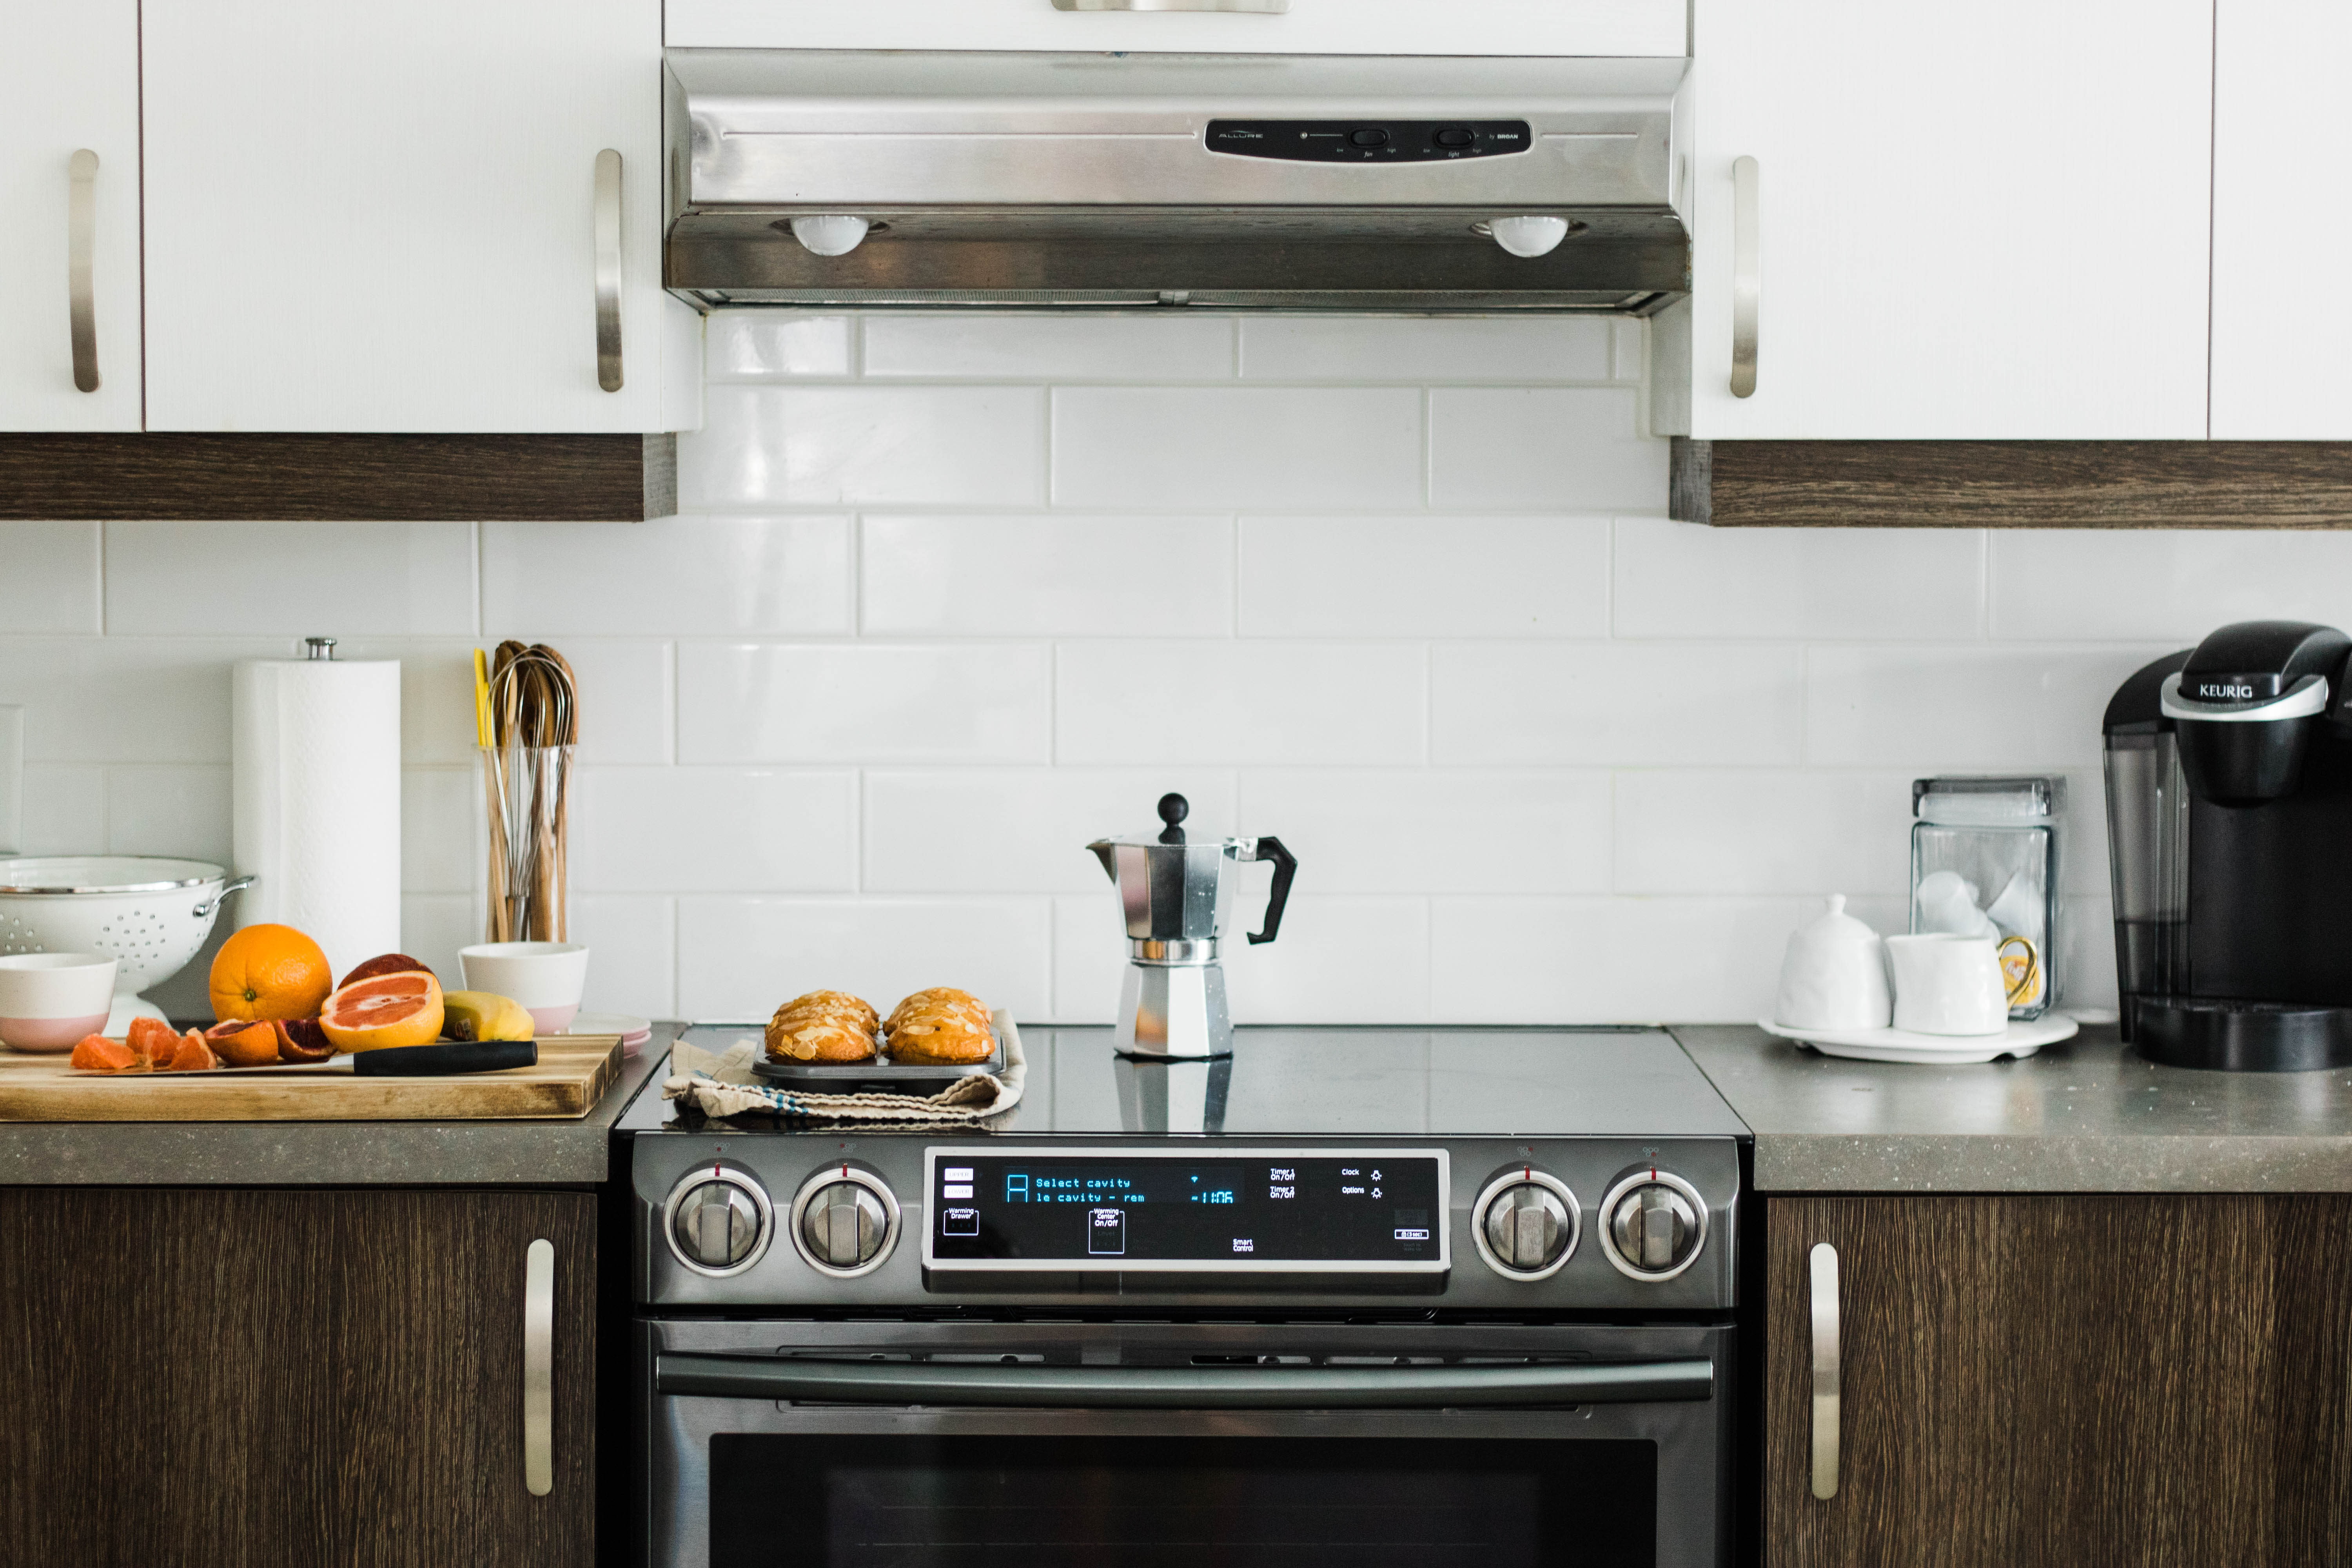 Best Appliance for a Home Chef: Range